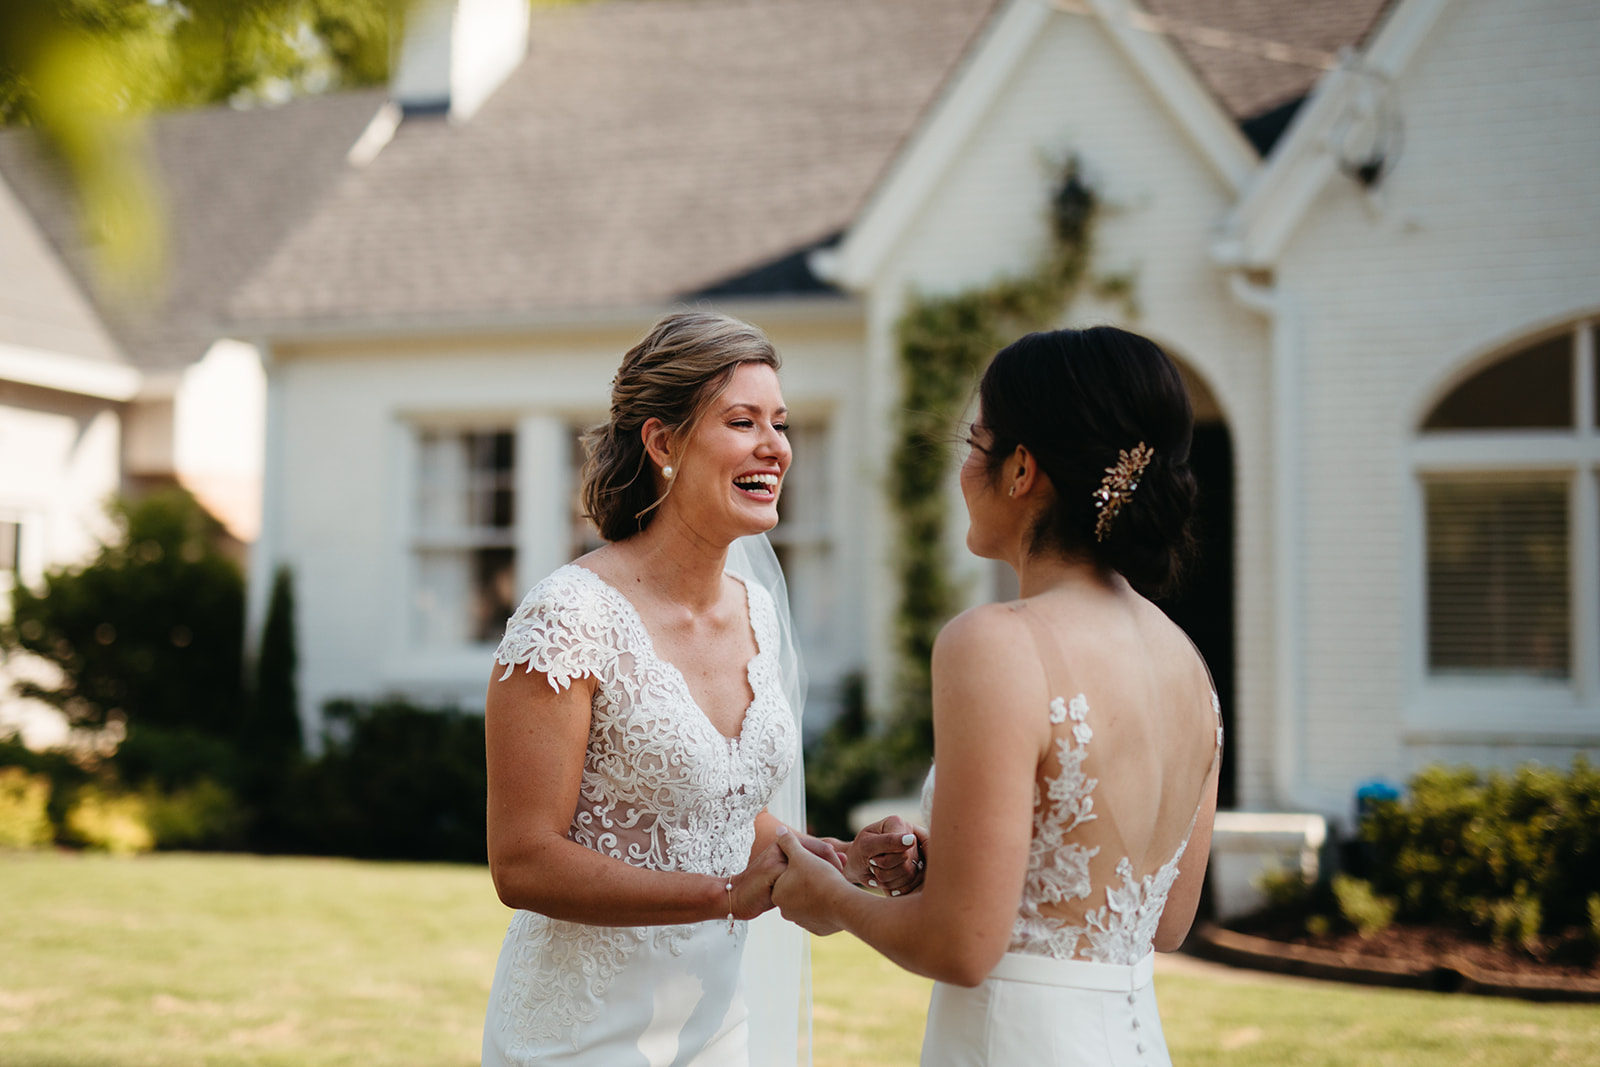 Lesbian couple has their first look on wedding day